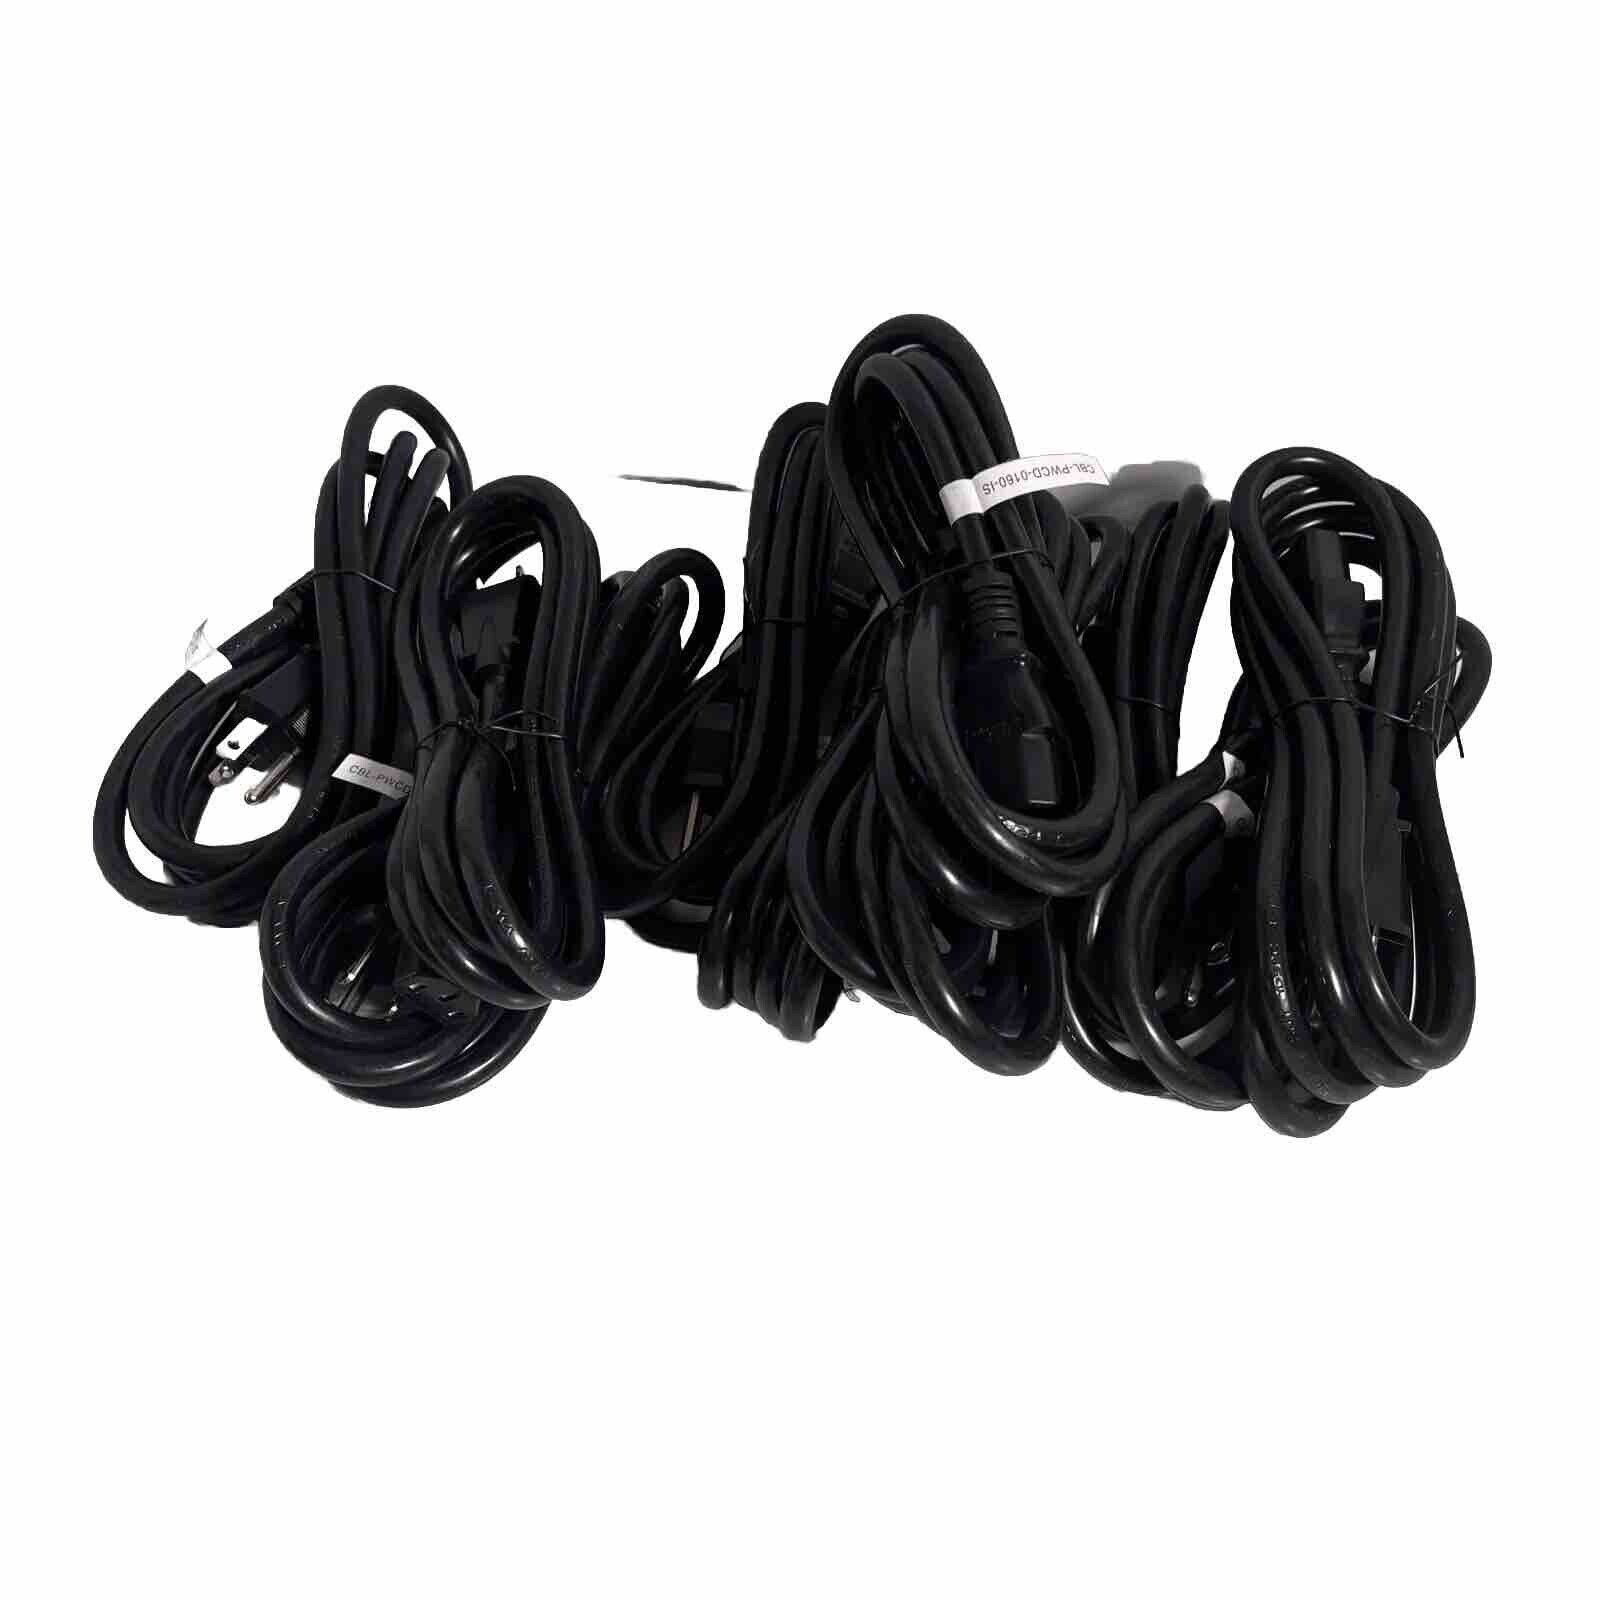 lot of 10x Supermicro CBL-PWCD-0160-IS 6FT Standard Power Cord